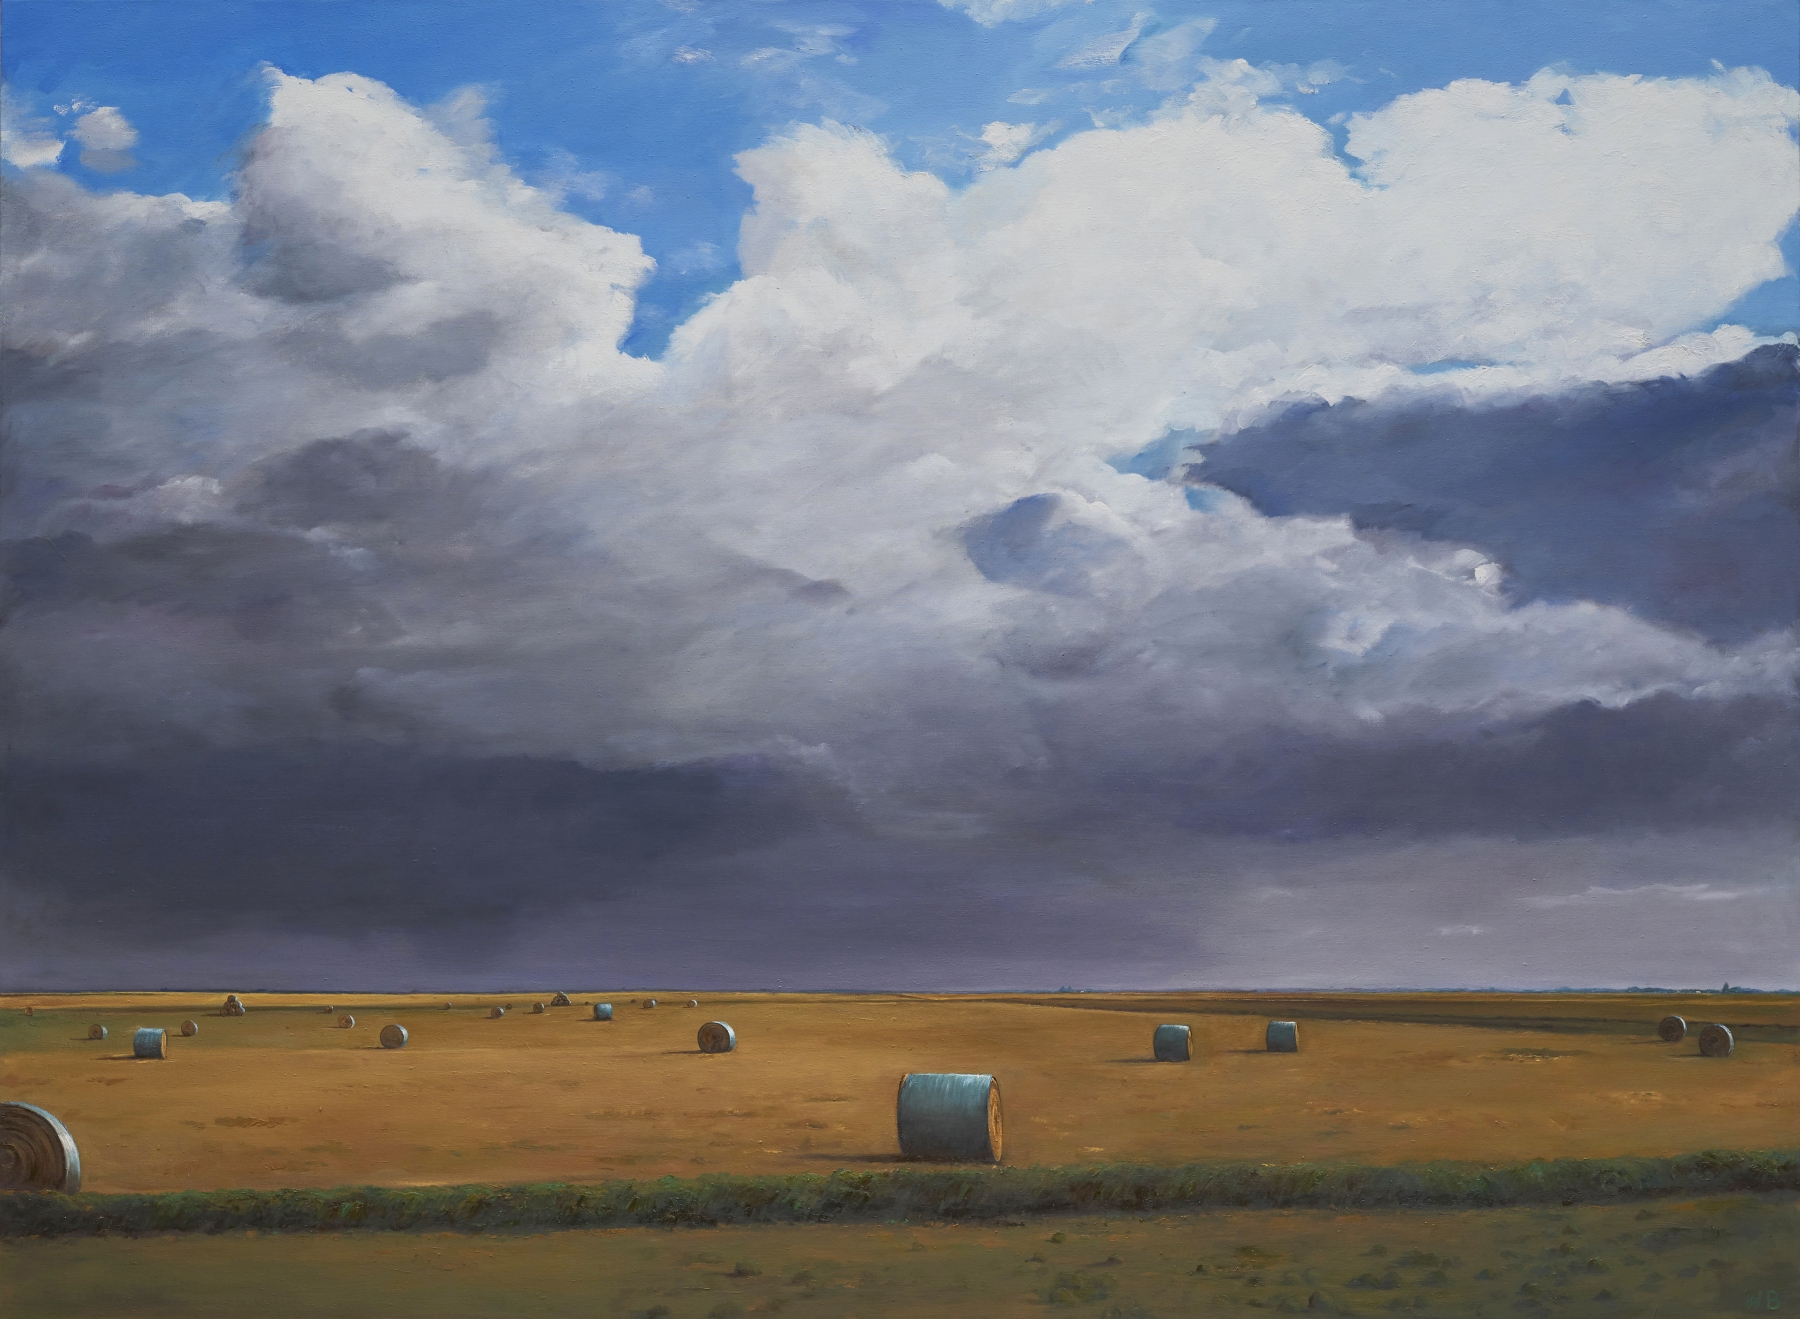 ​William Beckman,&nbsp;Bales #4, 2018, oil on panel, 73 x 99 1/2 inches